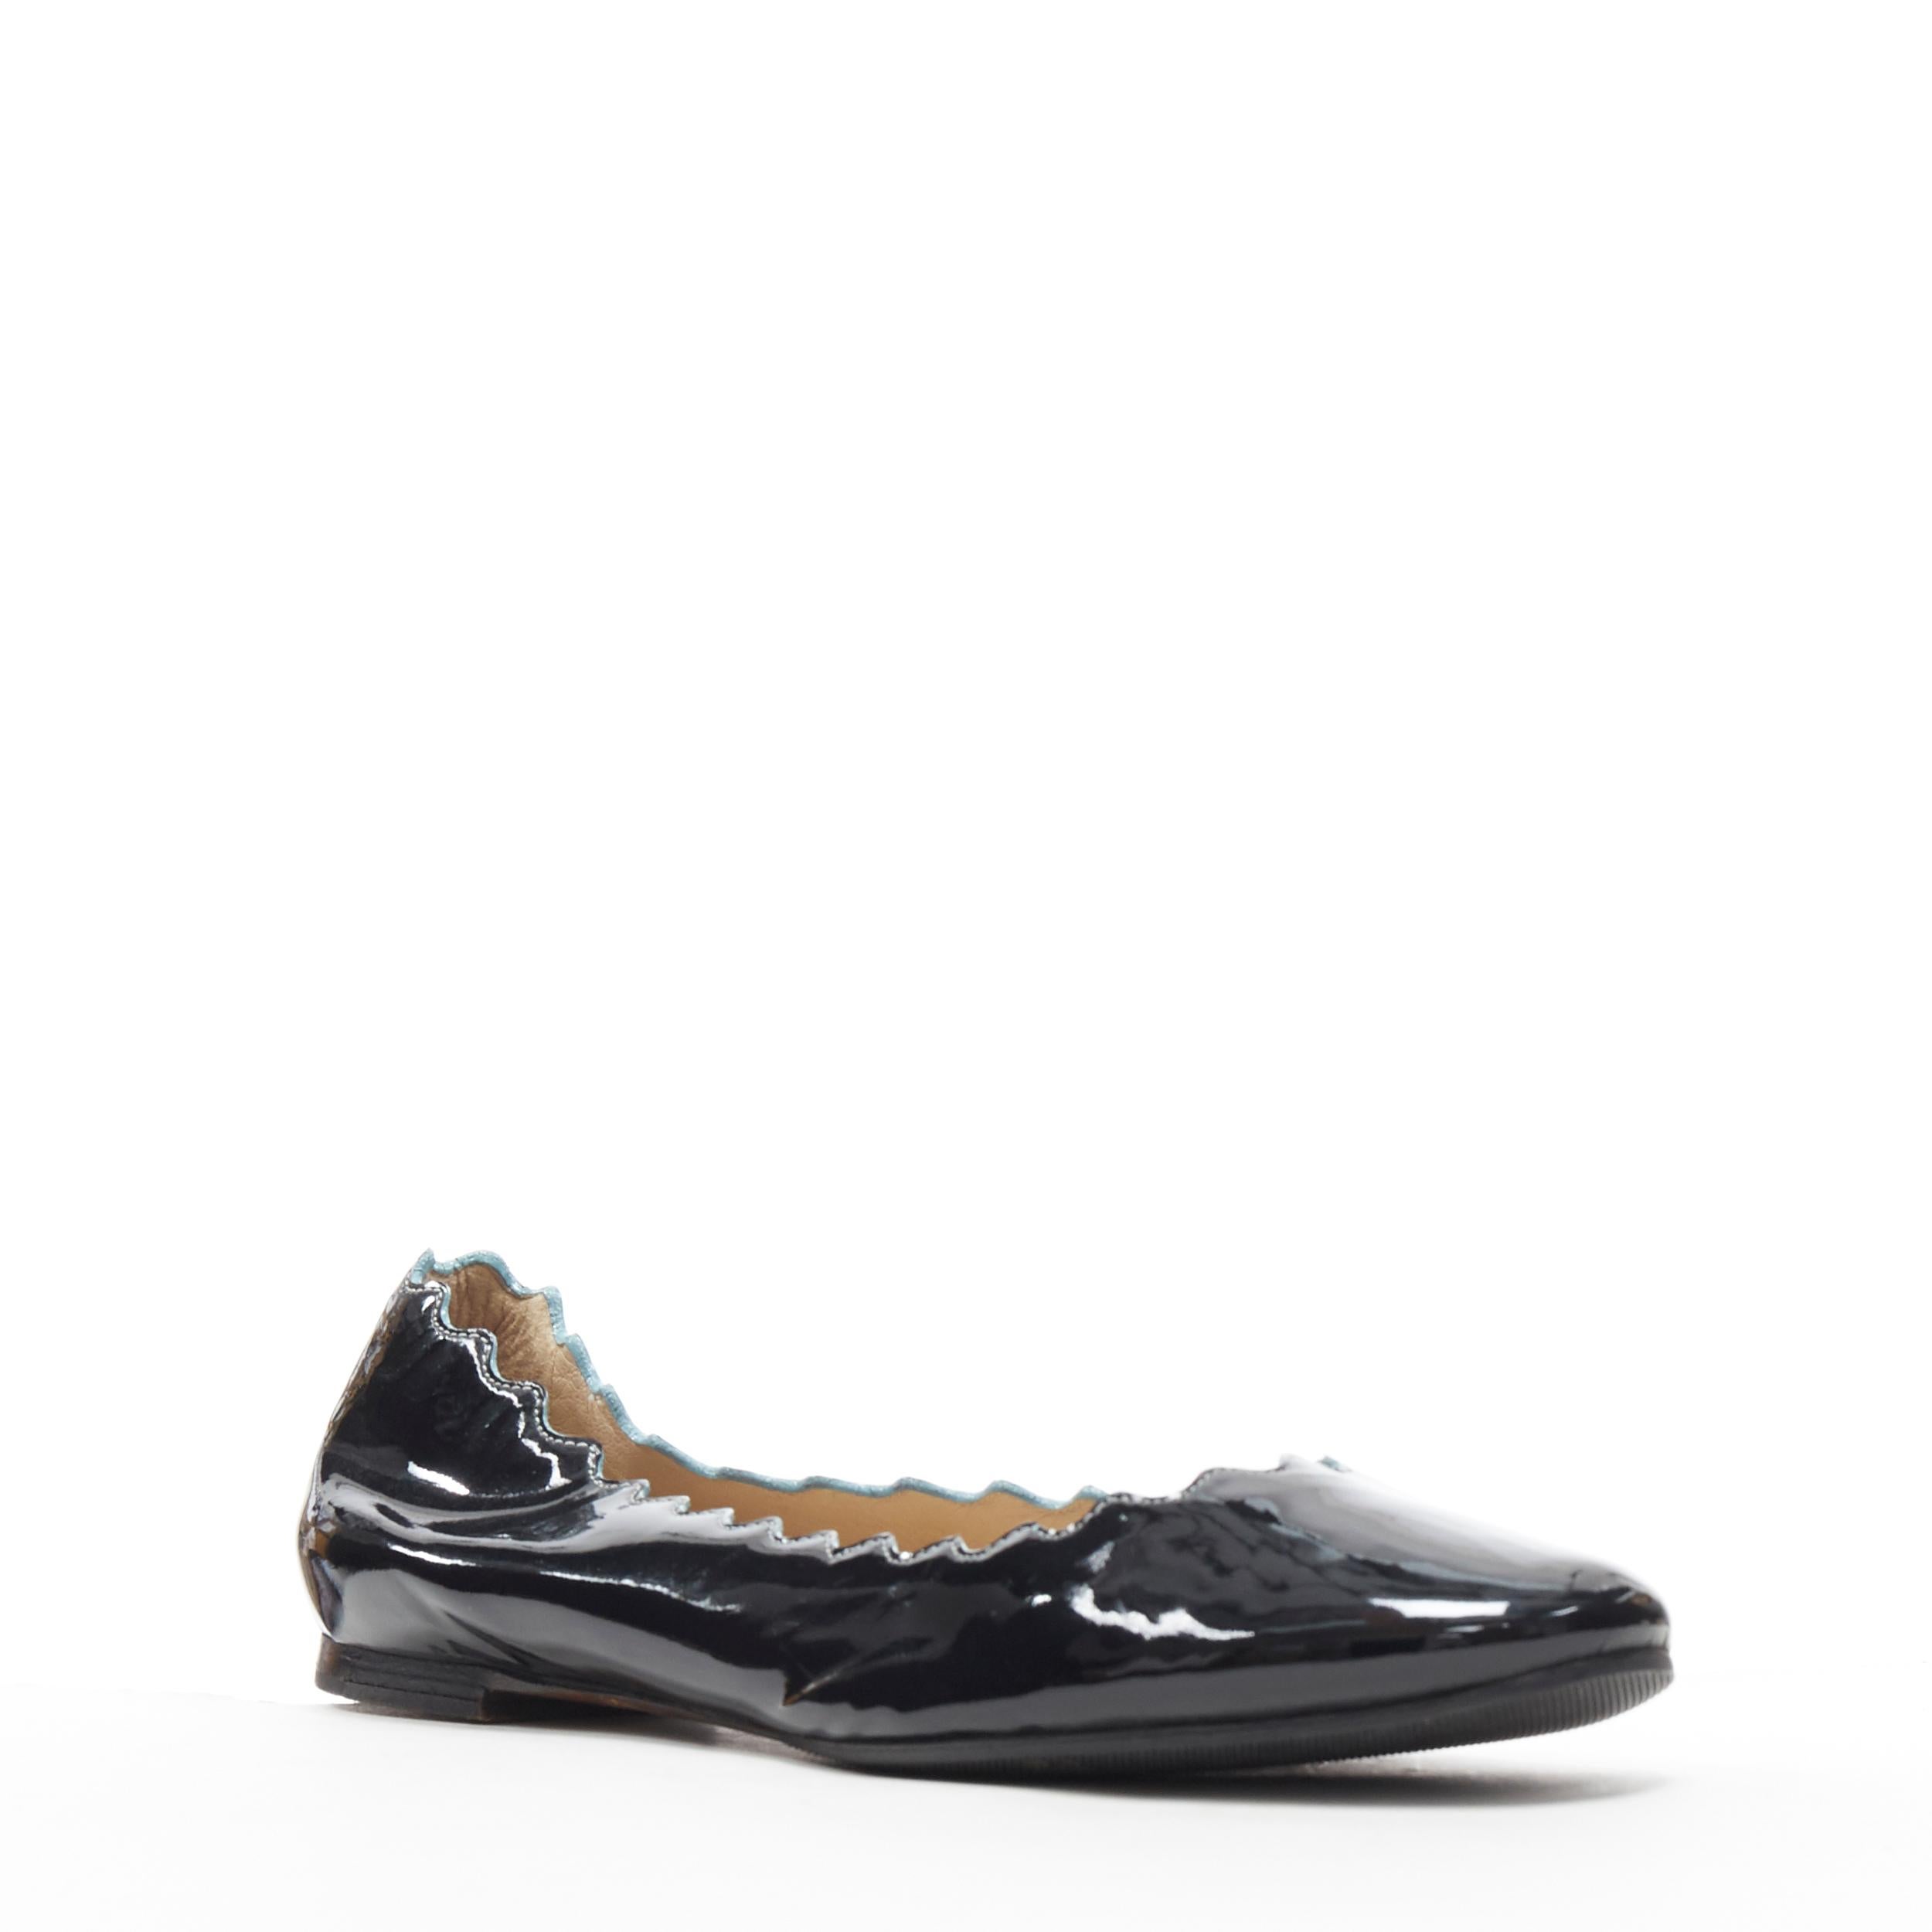 CHLOE Lauren  black patent leather scalloped edge round toe ballet flats EU35
Brand: Chloe
Model Name / Style: Lauren
Material: Patent leather
Color: Black
Pattern: Solid
Extra Detail: Light blue painted edges along scalloped seams. Flat (Under 1